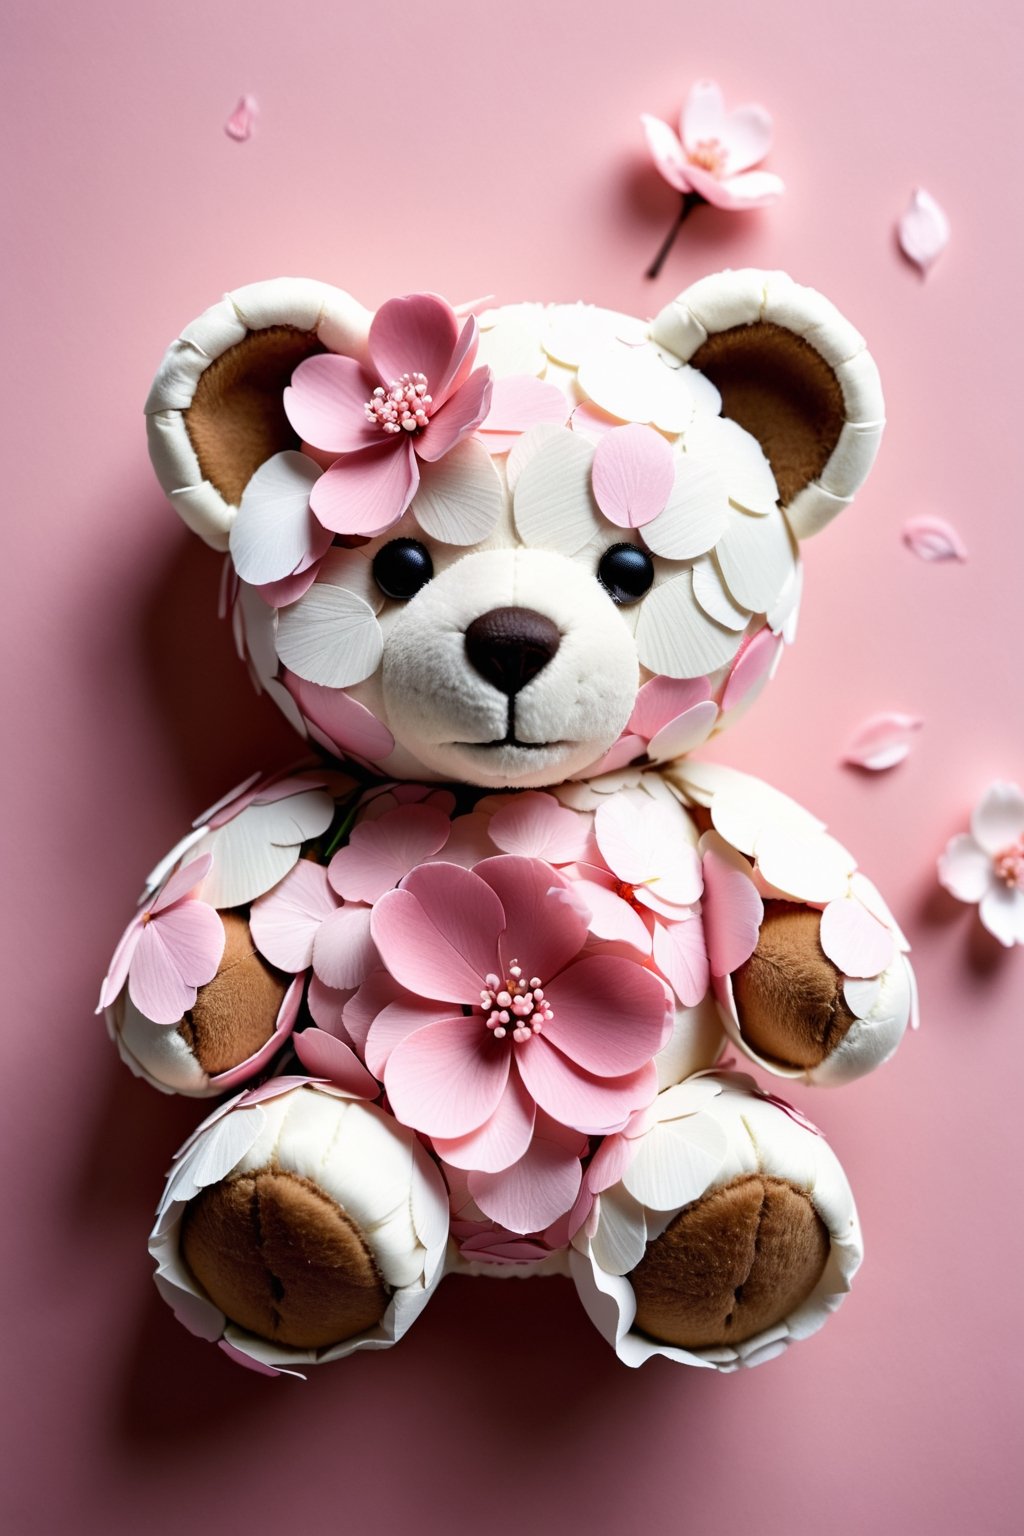 A teddy bear pattern crafted from spring cherry blossom petals. Delicate and intricate, the soft pink hues forming the adorable shape, captured with a macro lens on a Nikon Z50 to showcase the